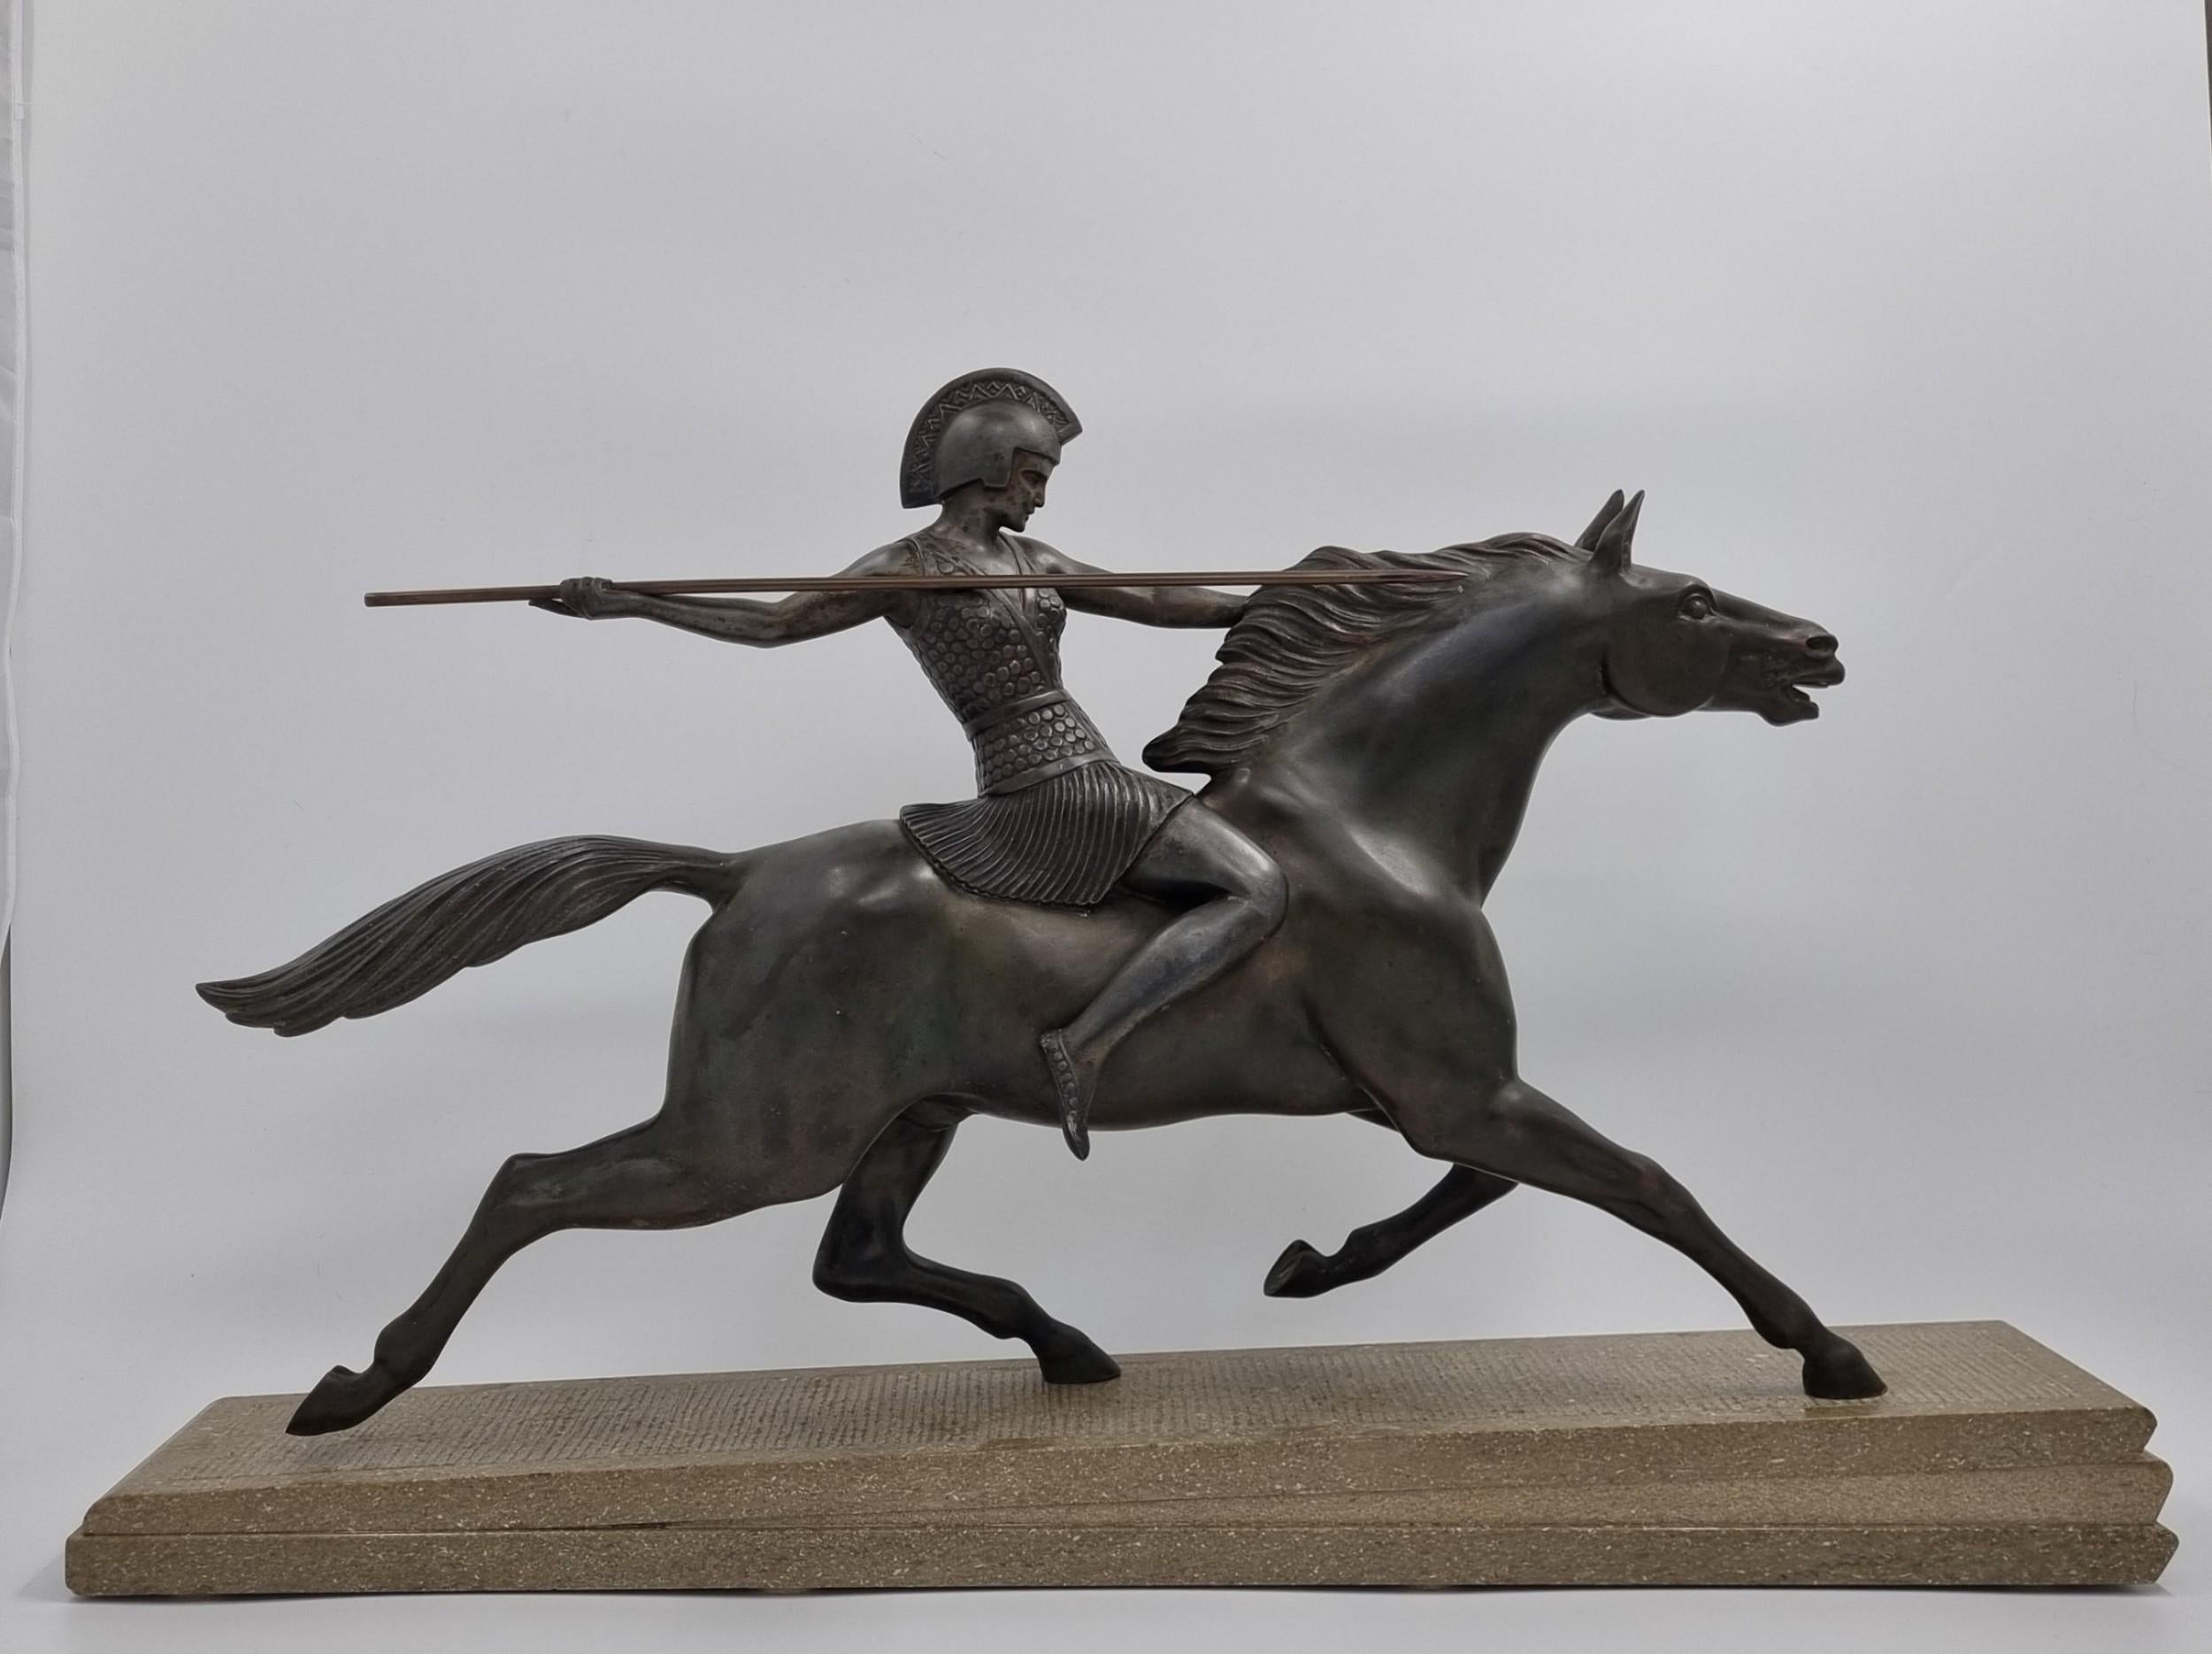 A stunning Art Deco Sculpture depicting an Amazon Warrior riding a horse.

Cold painted spelter, mounted on wedge-shaped, marble base, stylised as a Roman road.

An impressive piece of the finest quality, that rarely becomes available for